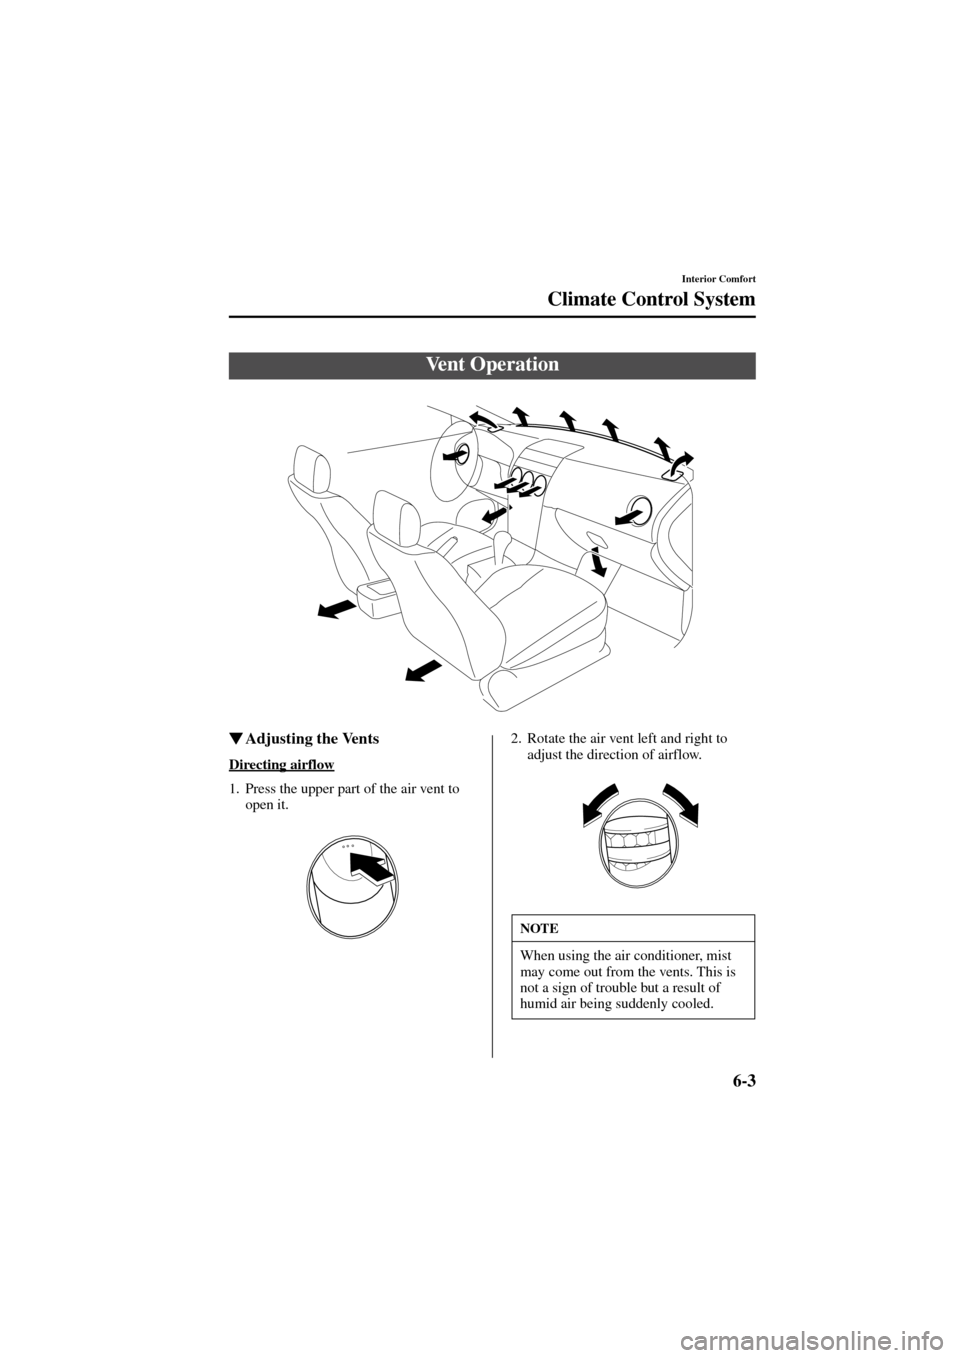 MAZDA MODEL 6 2004  Owners Manual (in English) 6-3
Interior Comfort
Climate Control System
Form No. 8R29-EA-02I
Adjusting the Vents
Directing airflow
1. Press the upper part of the air vent to 
open it.2. Rotate the air vent left and right to 
ad